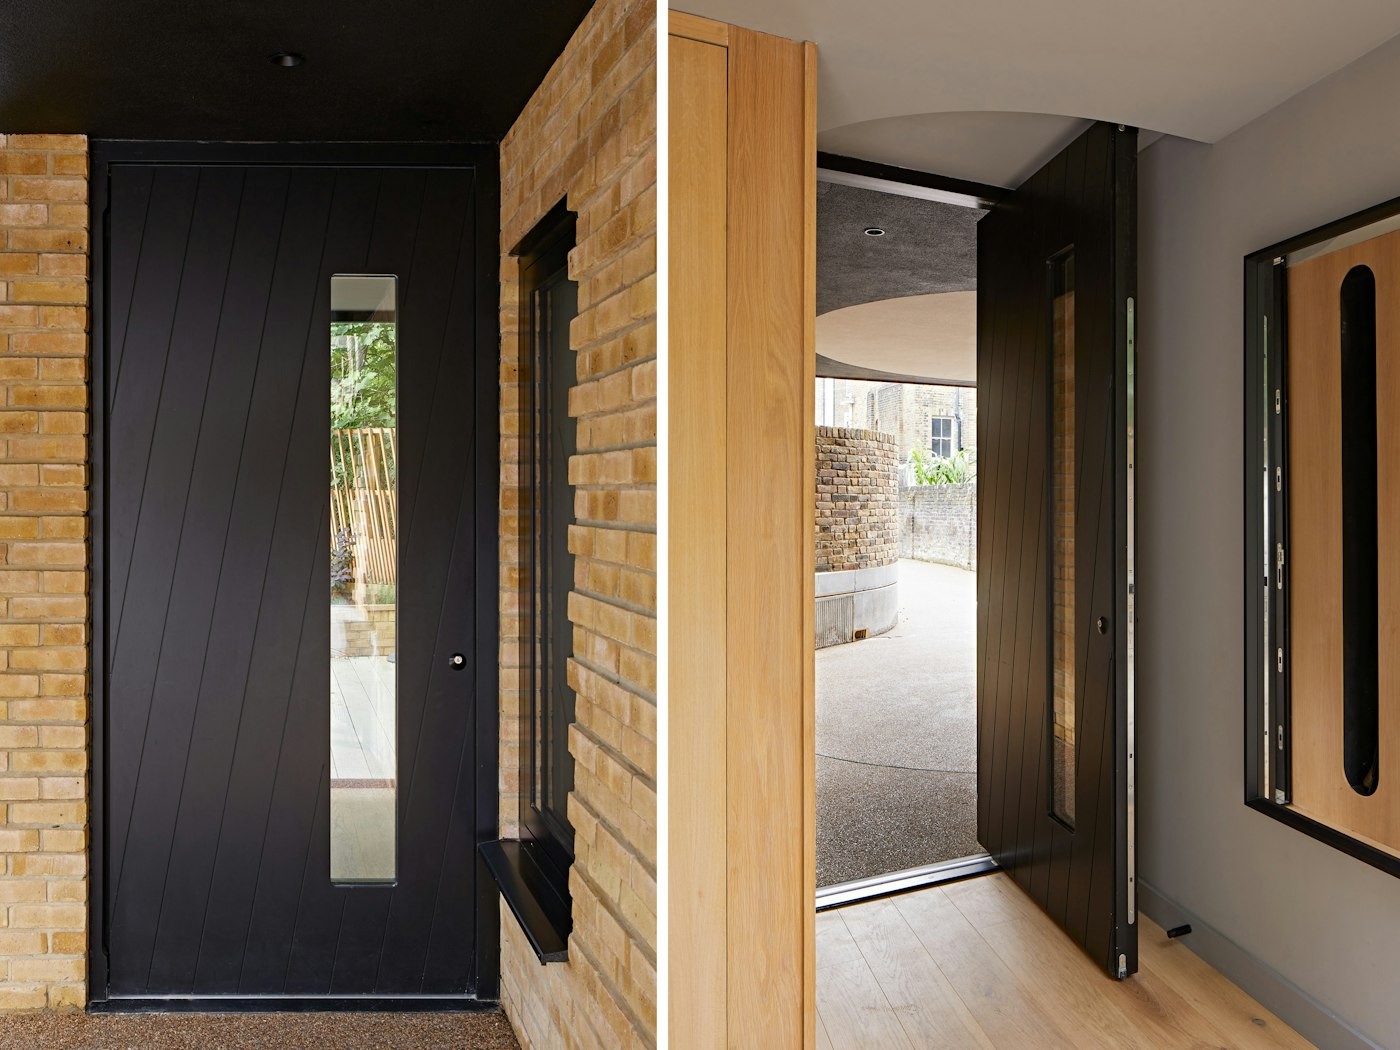 Interesting diagonal grooves offer a twist of design style on this modern black front door